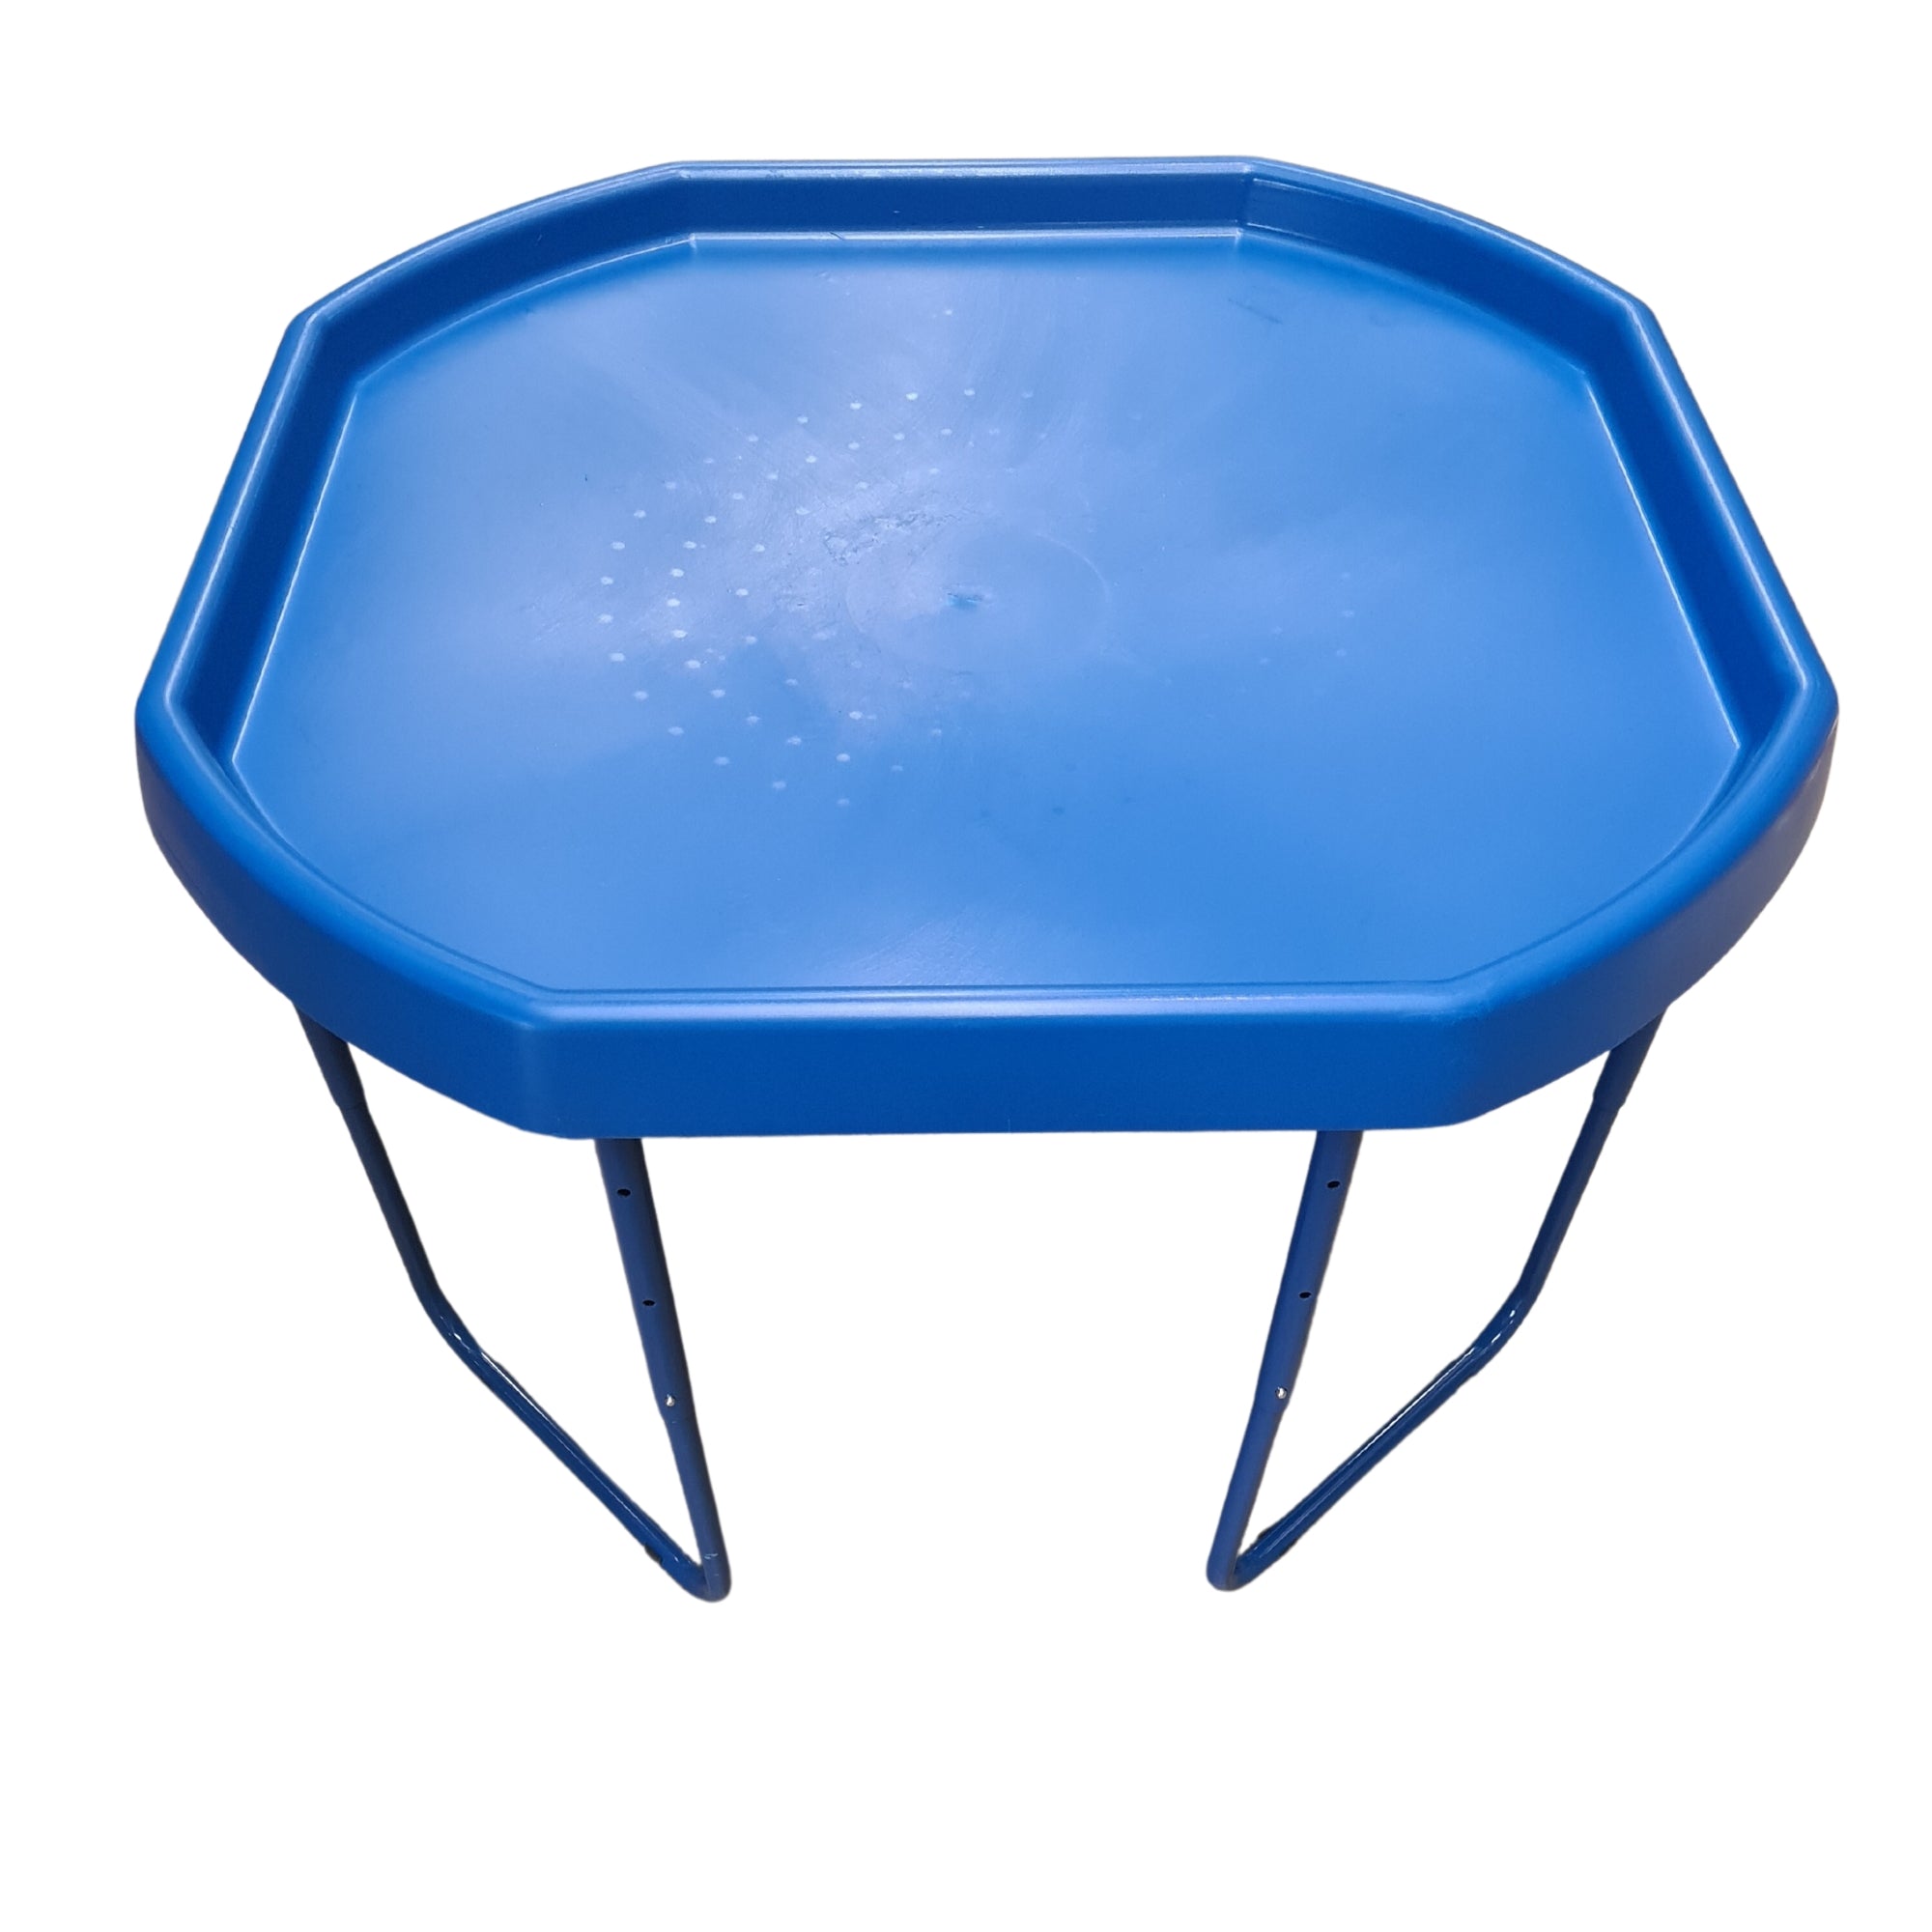 Original XL Tuff Tray and Stand - 3 Colour Options